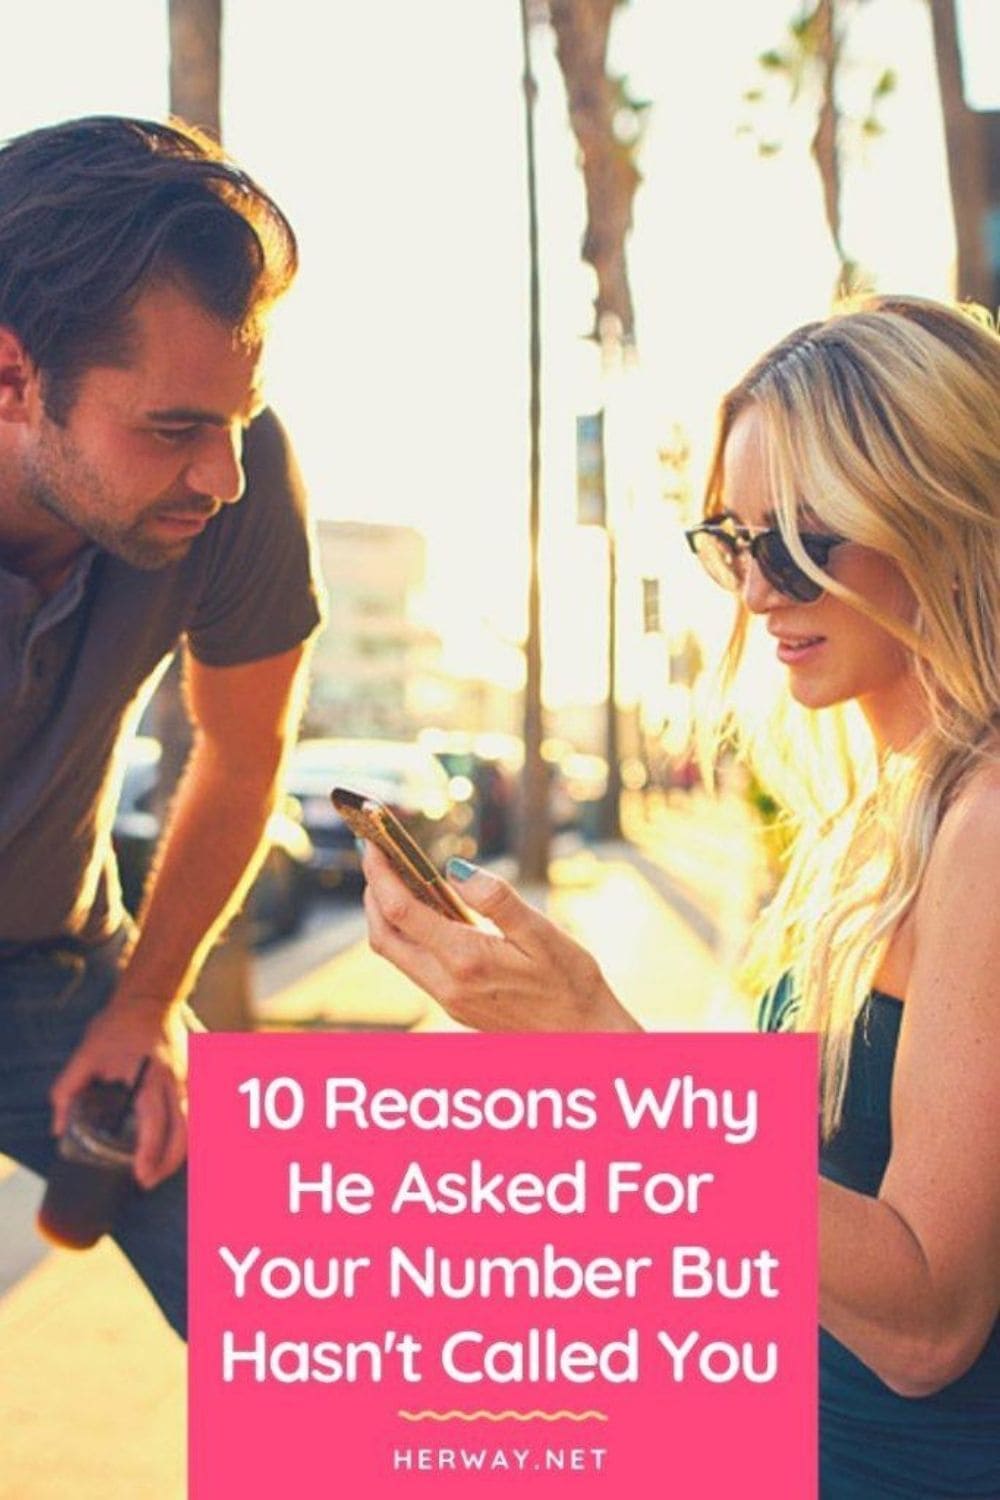 10 Reasons Why He Asked For Your Number But Hasn't Called You